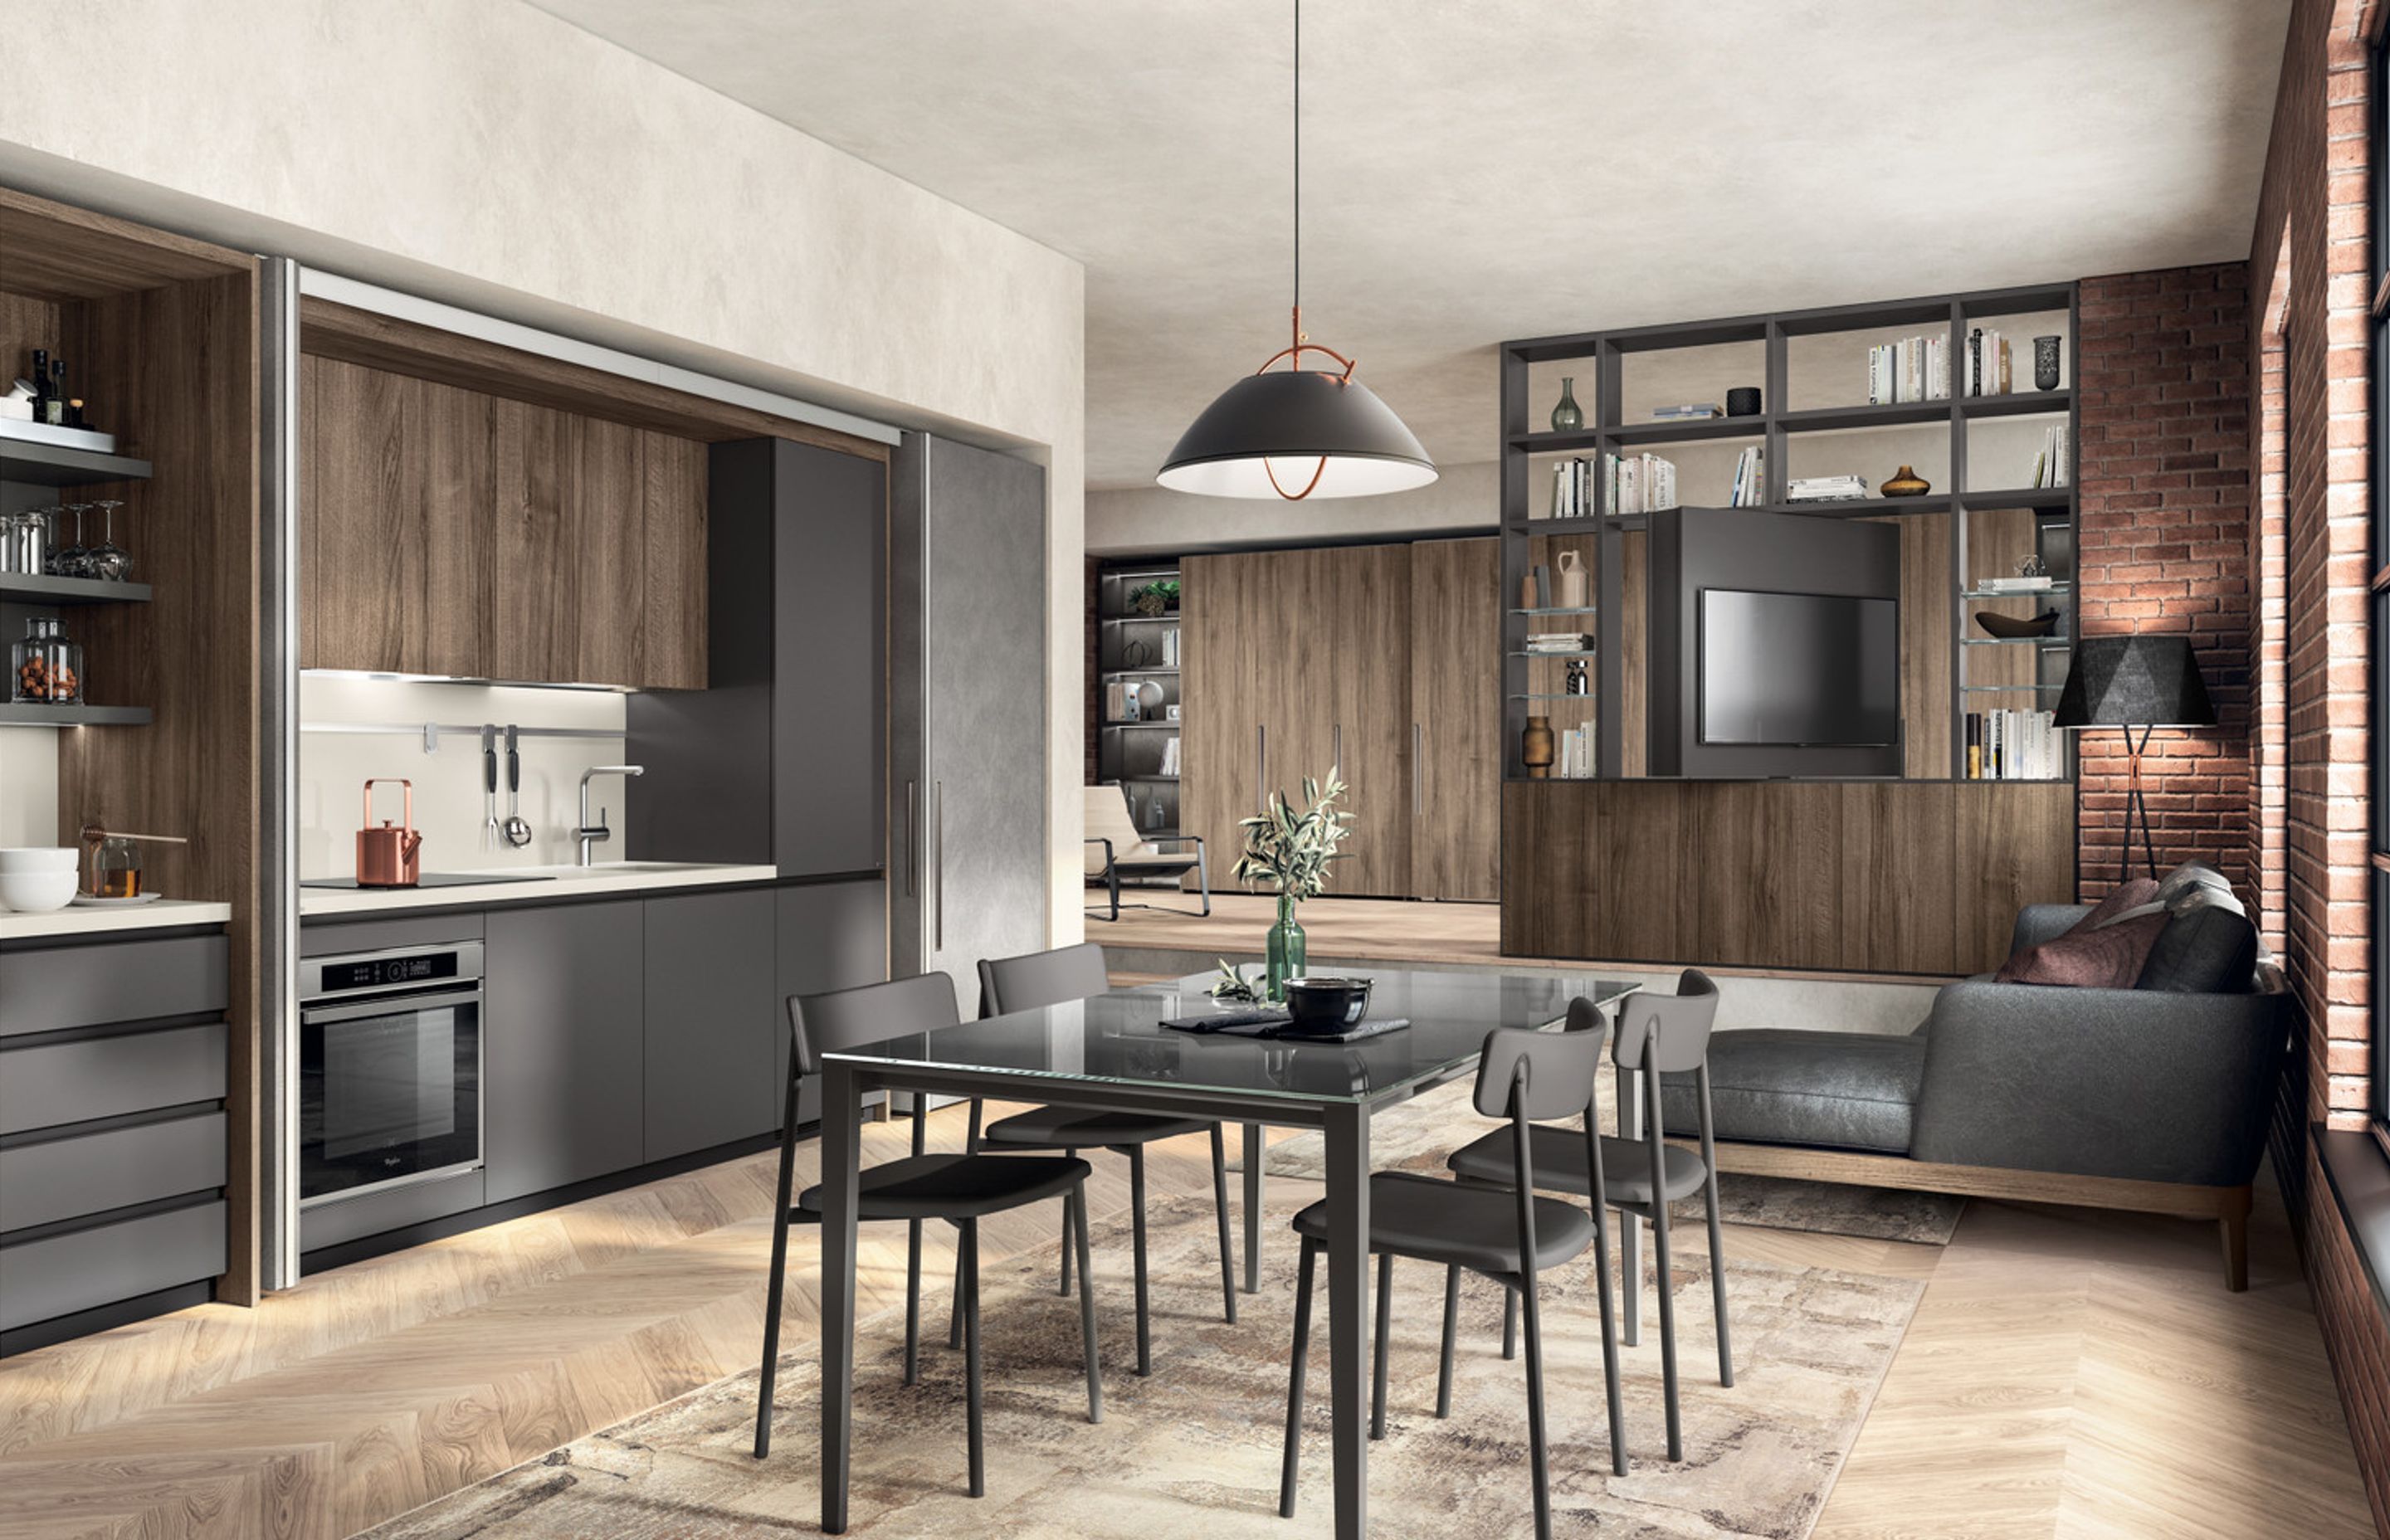 The BoxLife furnishing collection manages to adapt to the various different requirements of contemporary life: in this configuration it furnishes a loft where all the everyday activities are gathered, by day and by night, while retaining a superior aesthetic and functional standard in every detail.